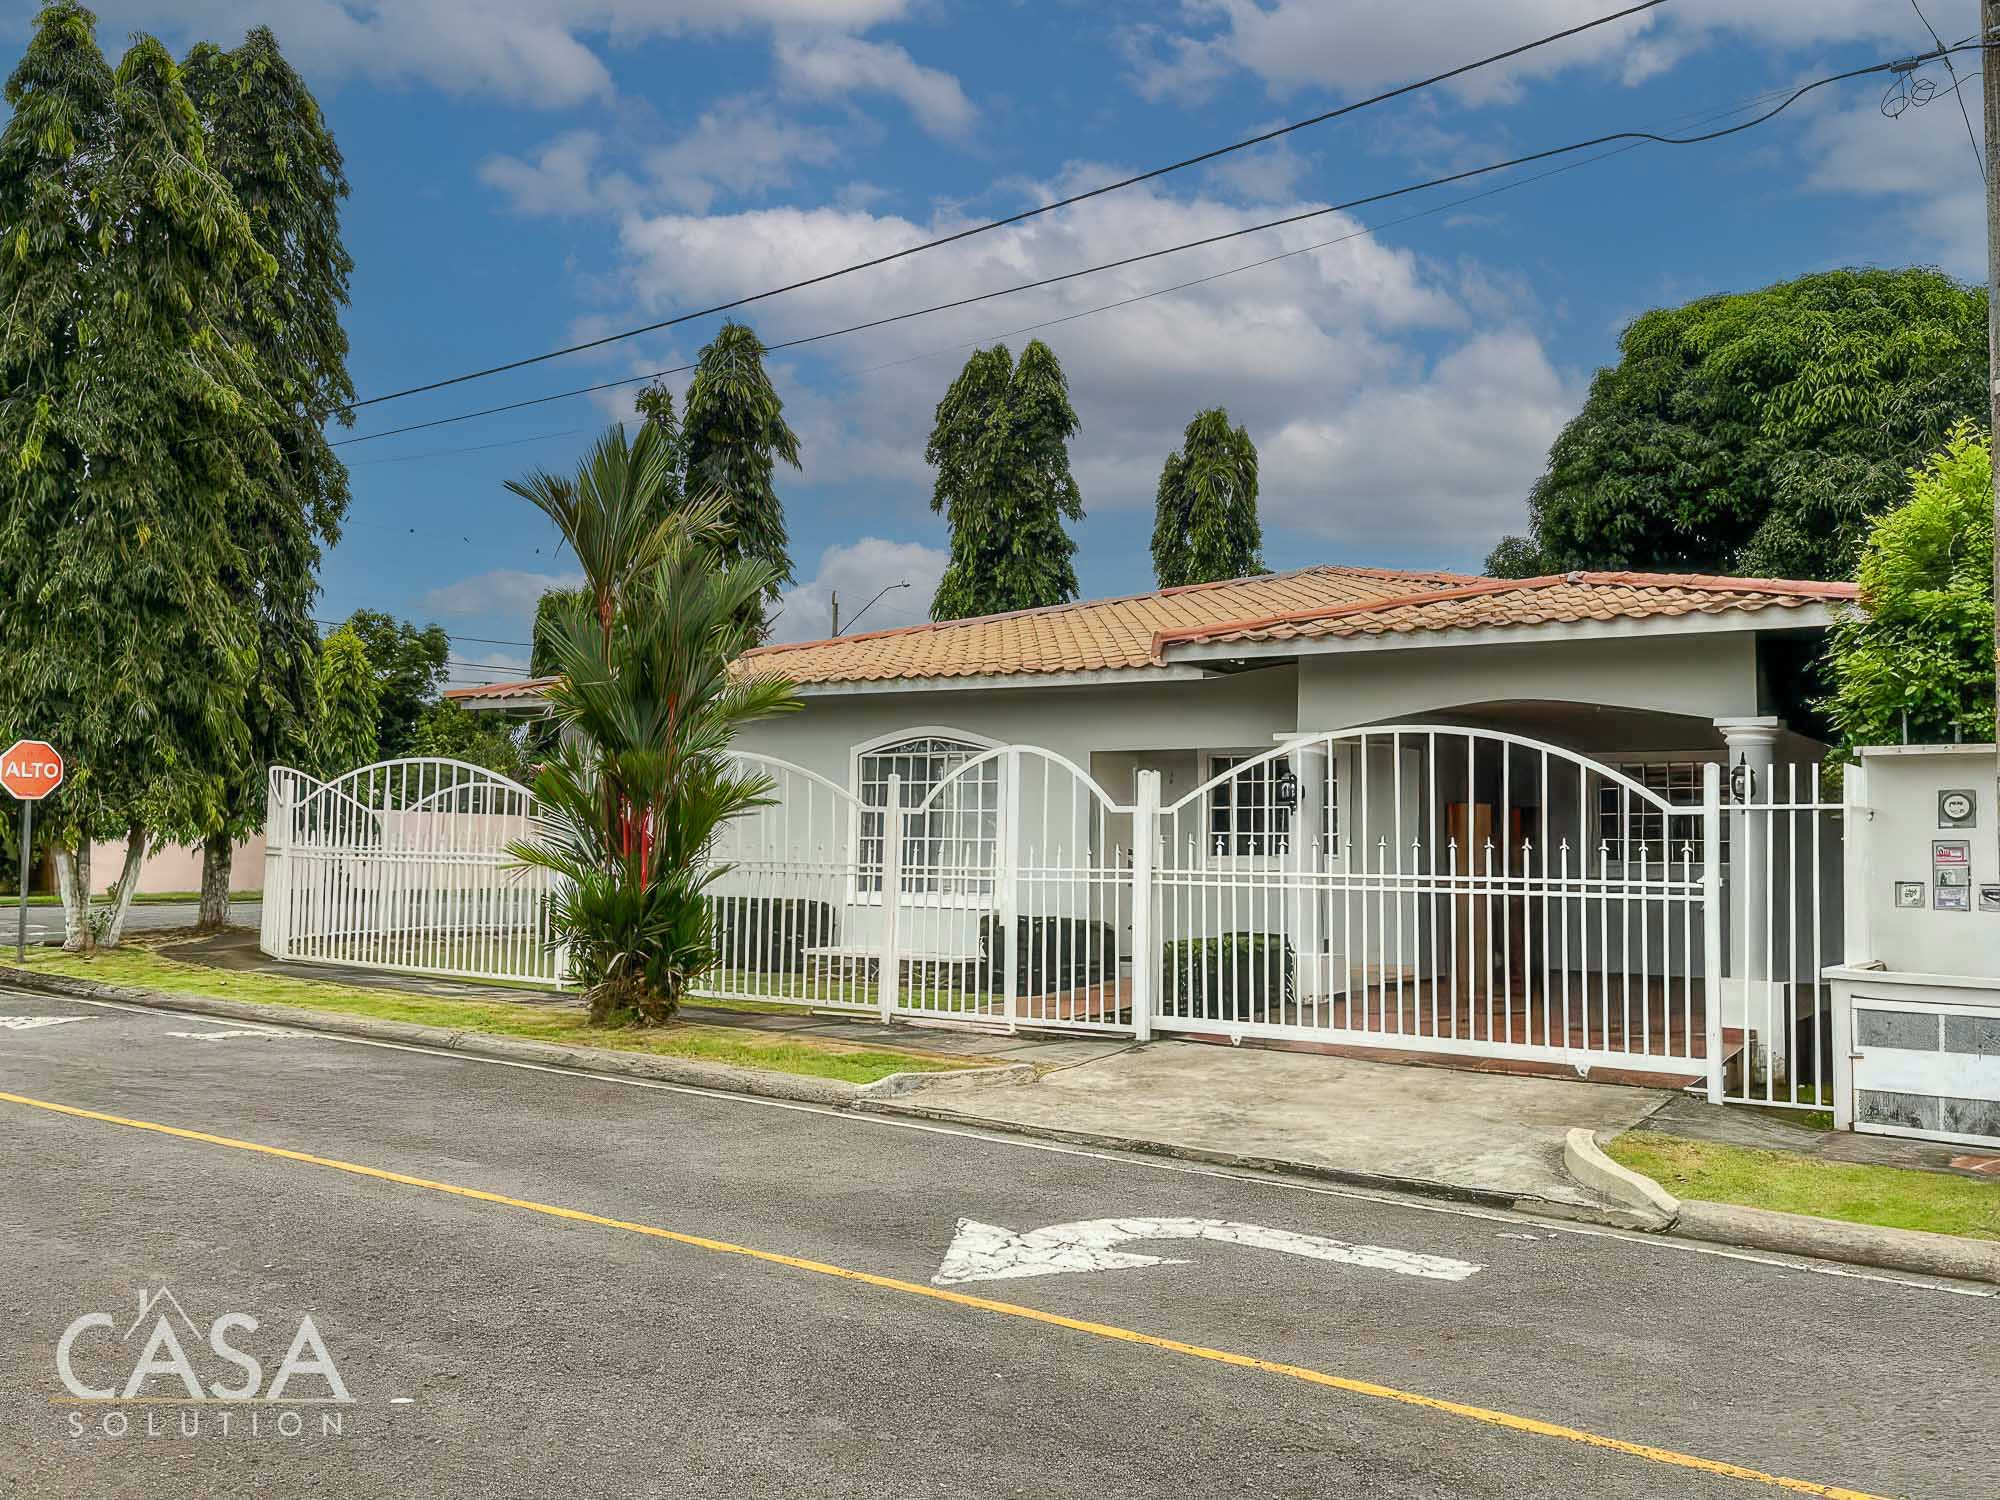 Price Reduction! Lovely 3-Bedroom Home For Sale or Rent in Villa María, San Pablo, Chiriqui